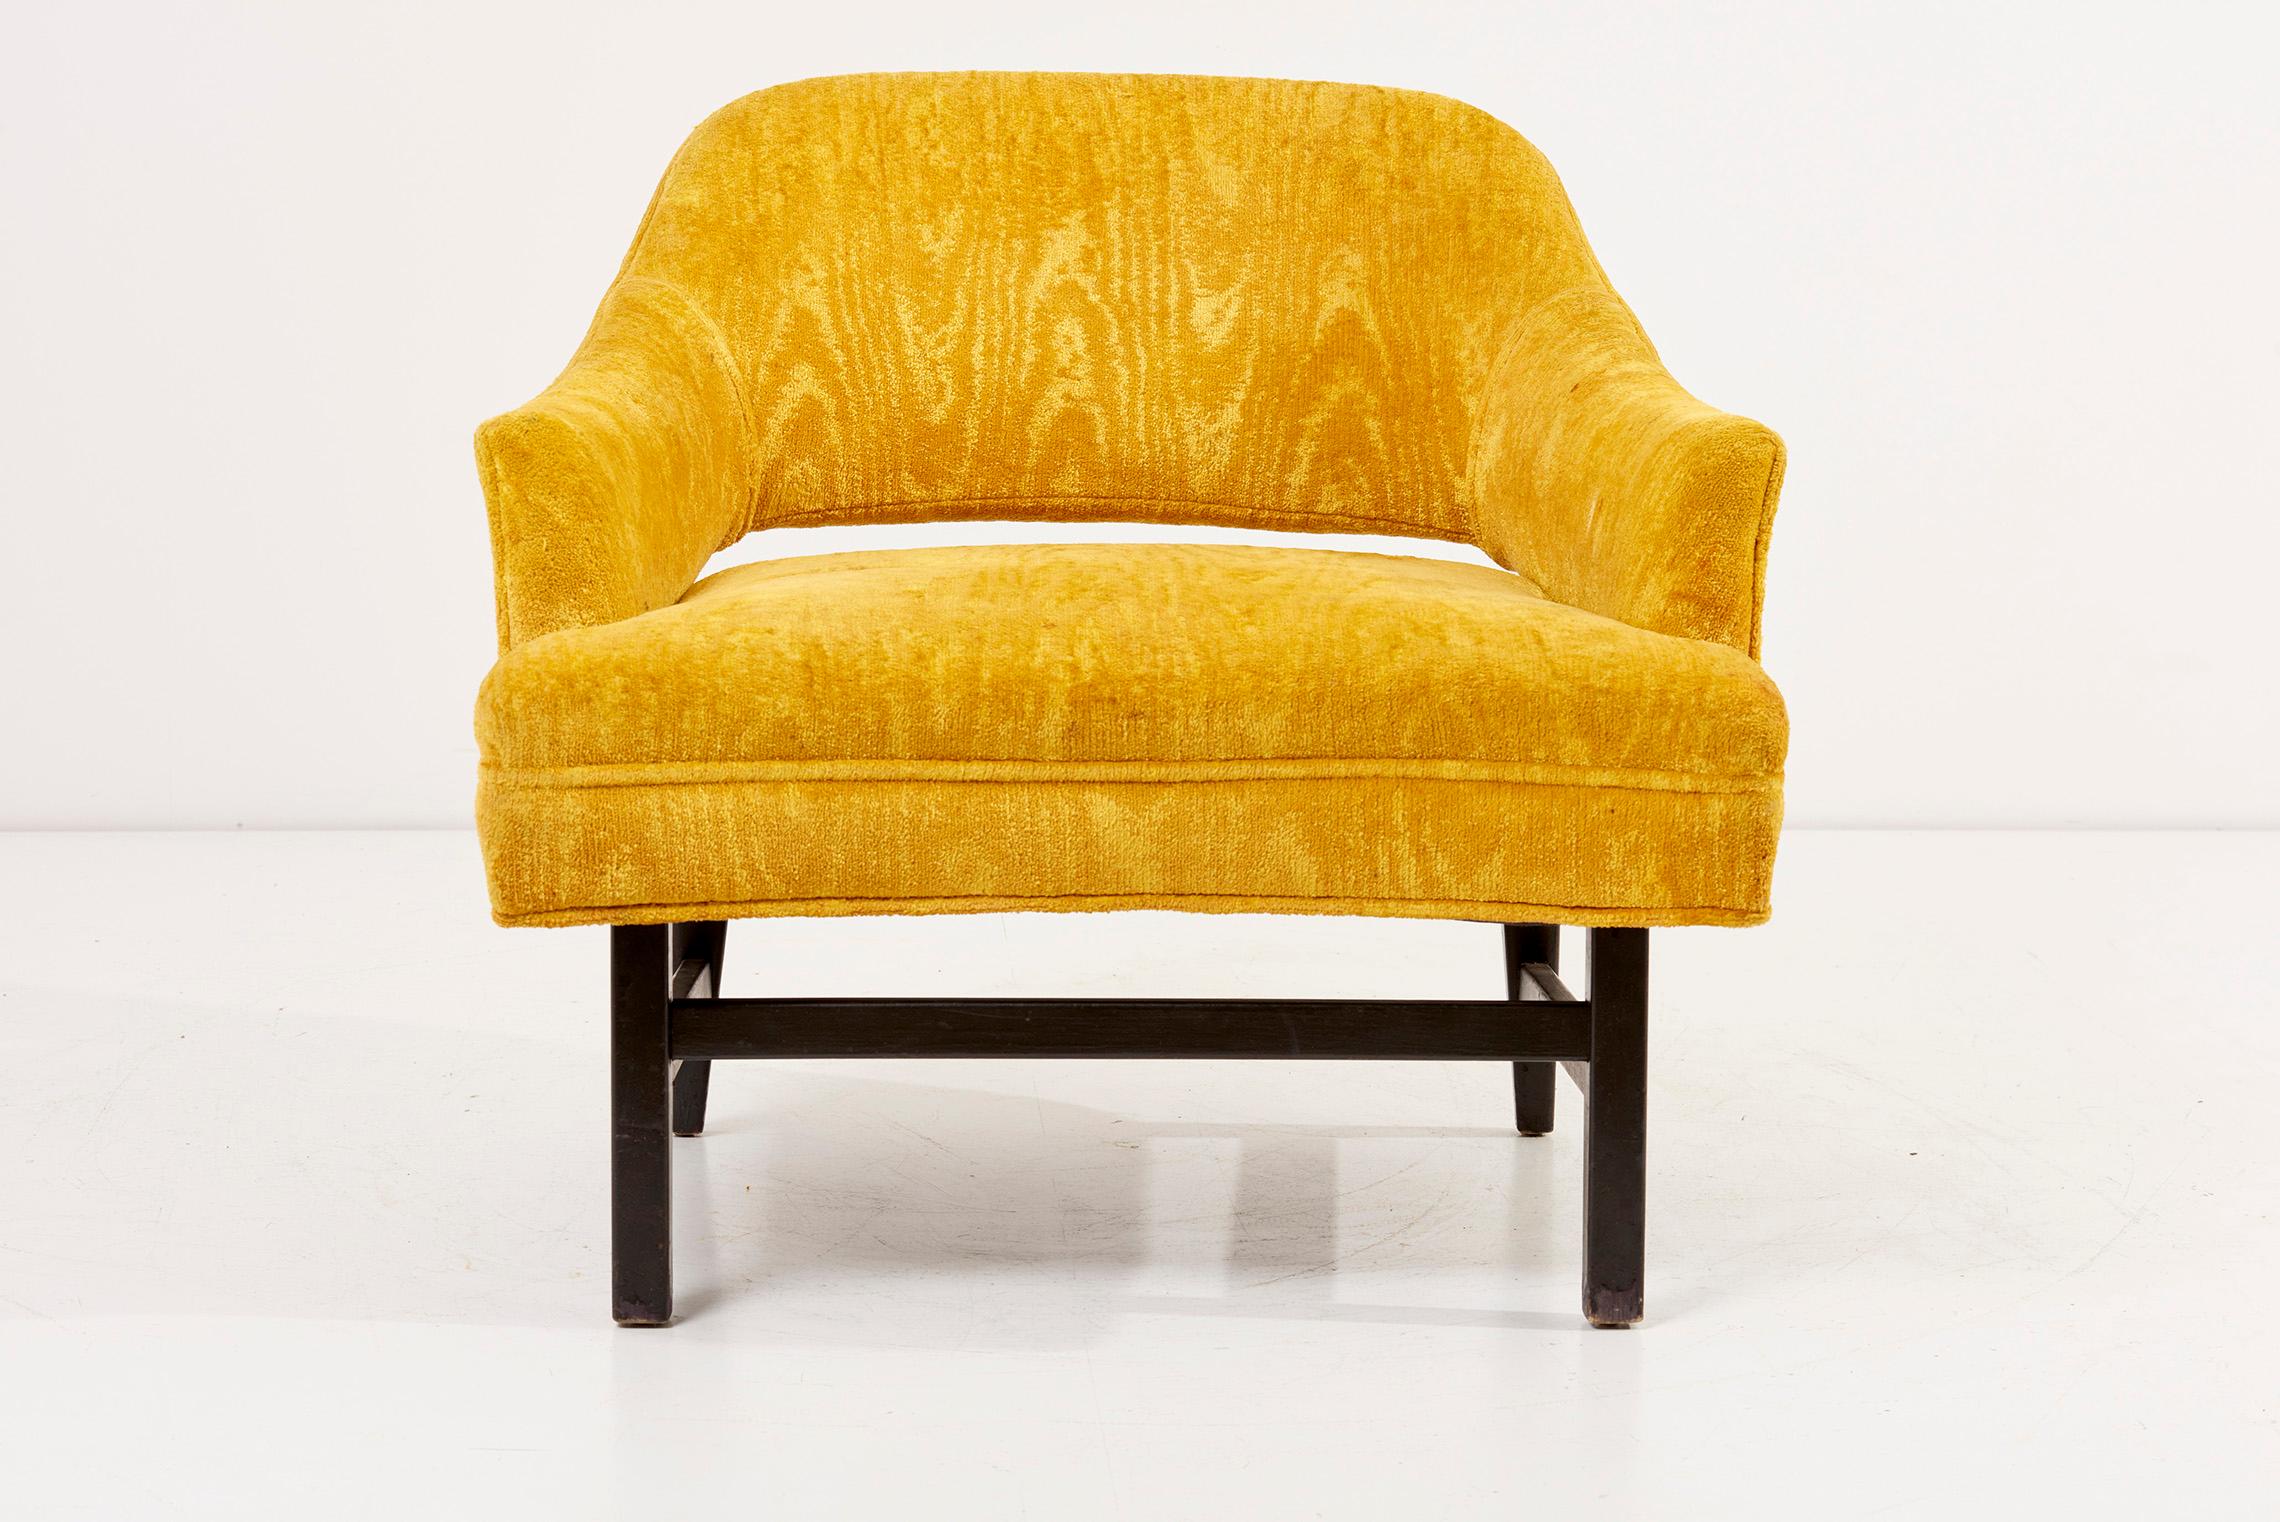 Pair of yellow Harvey Probber Lounge Chairs, USA 1960s For Sale 9